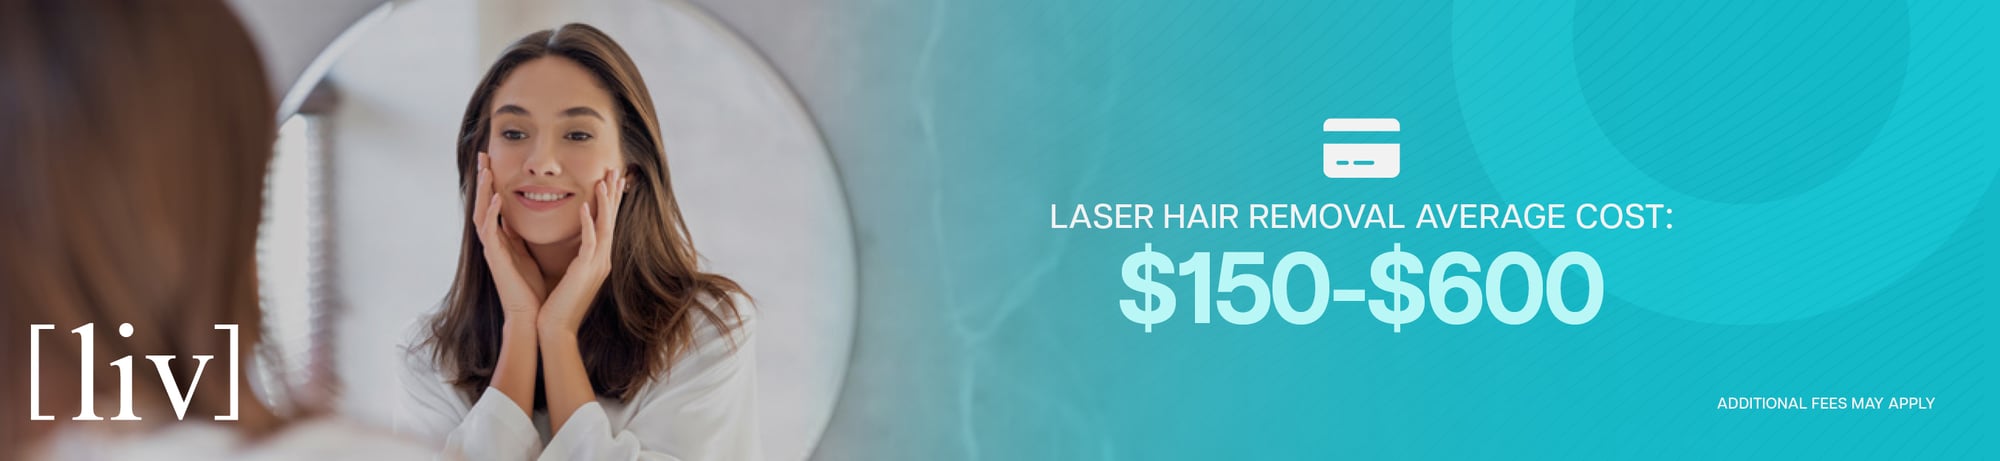 laser hair removal-2